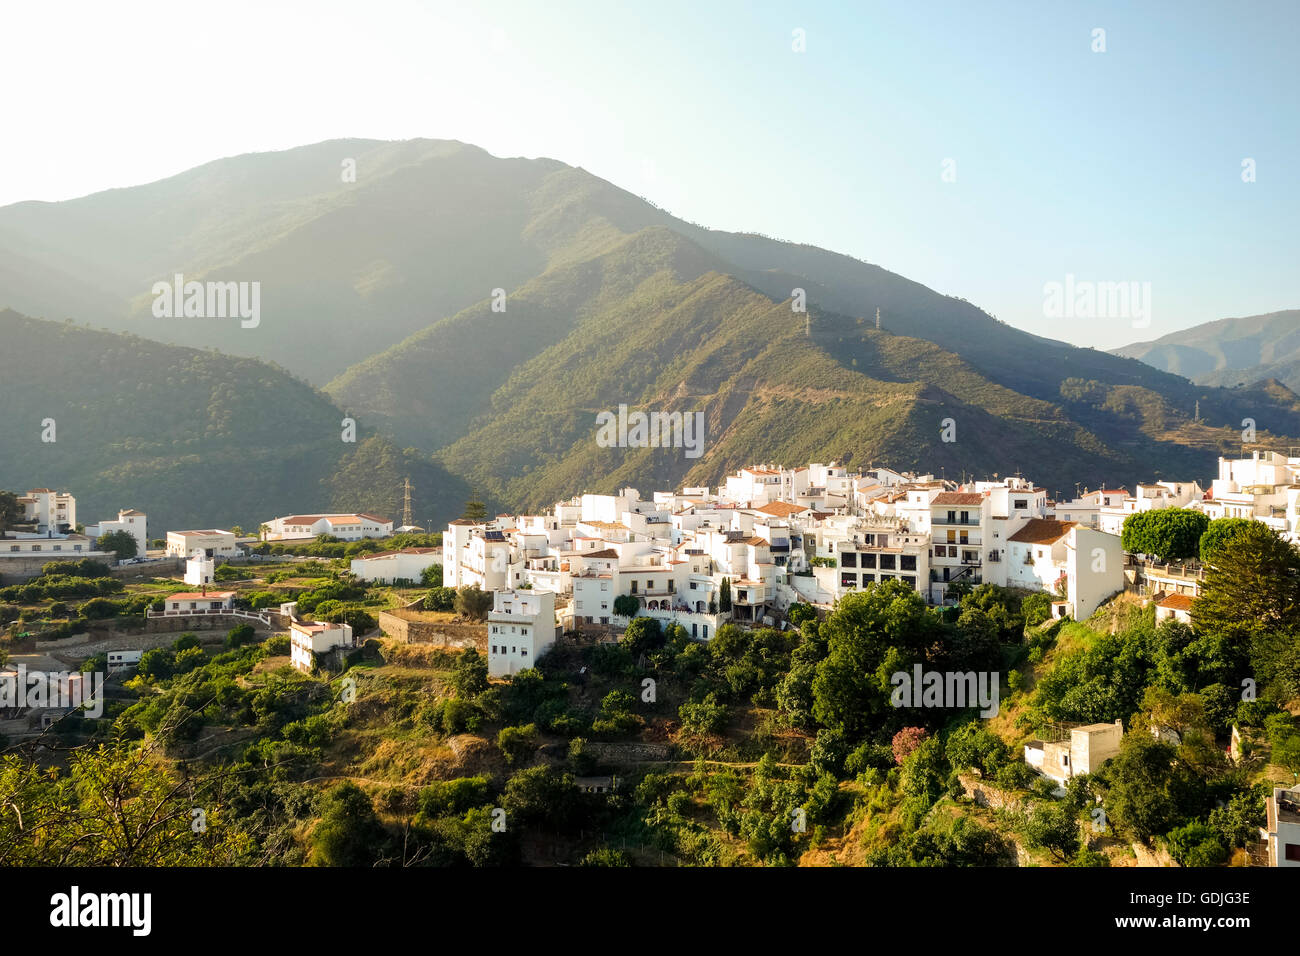 The white washed village of Istan, hidden in mountain range of Sierra de las Nieves, Andalusia, Spain Stock Photo